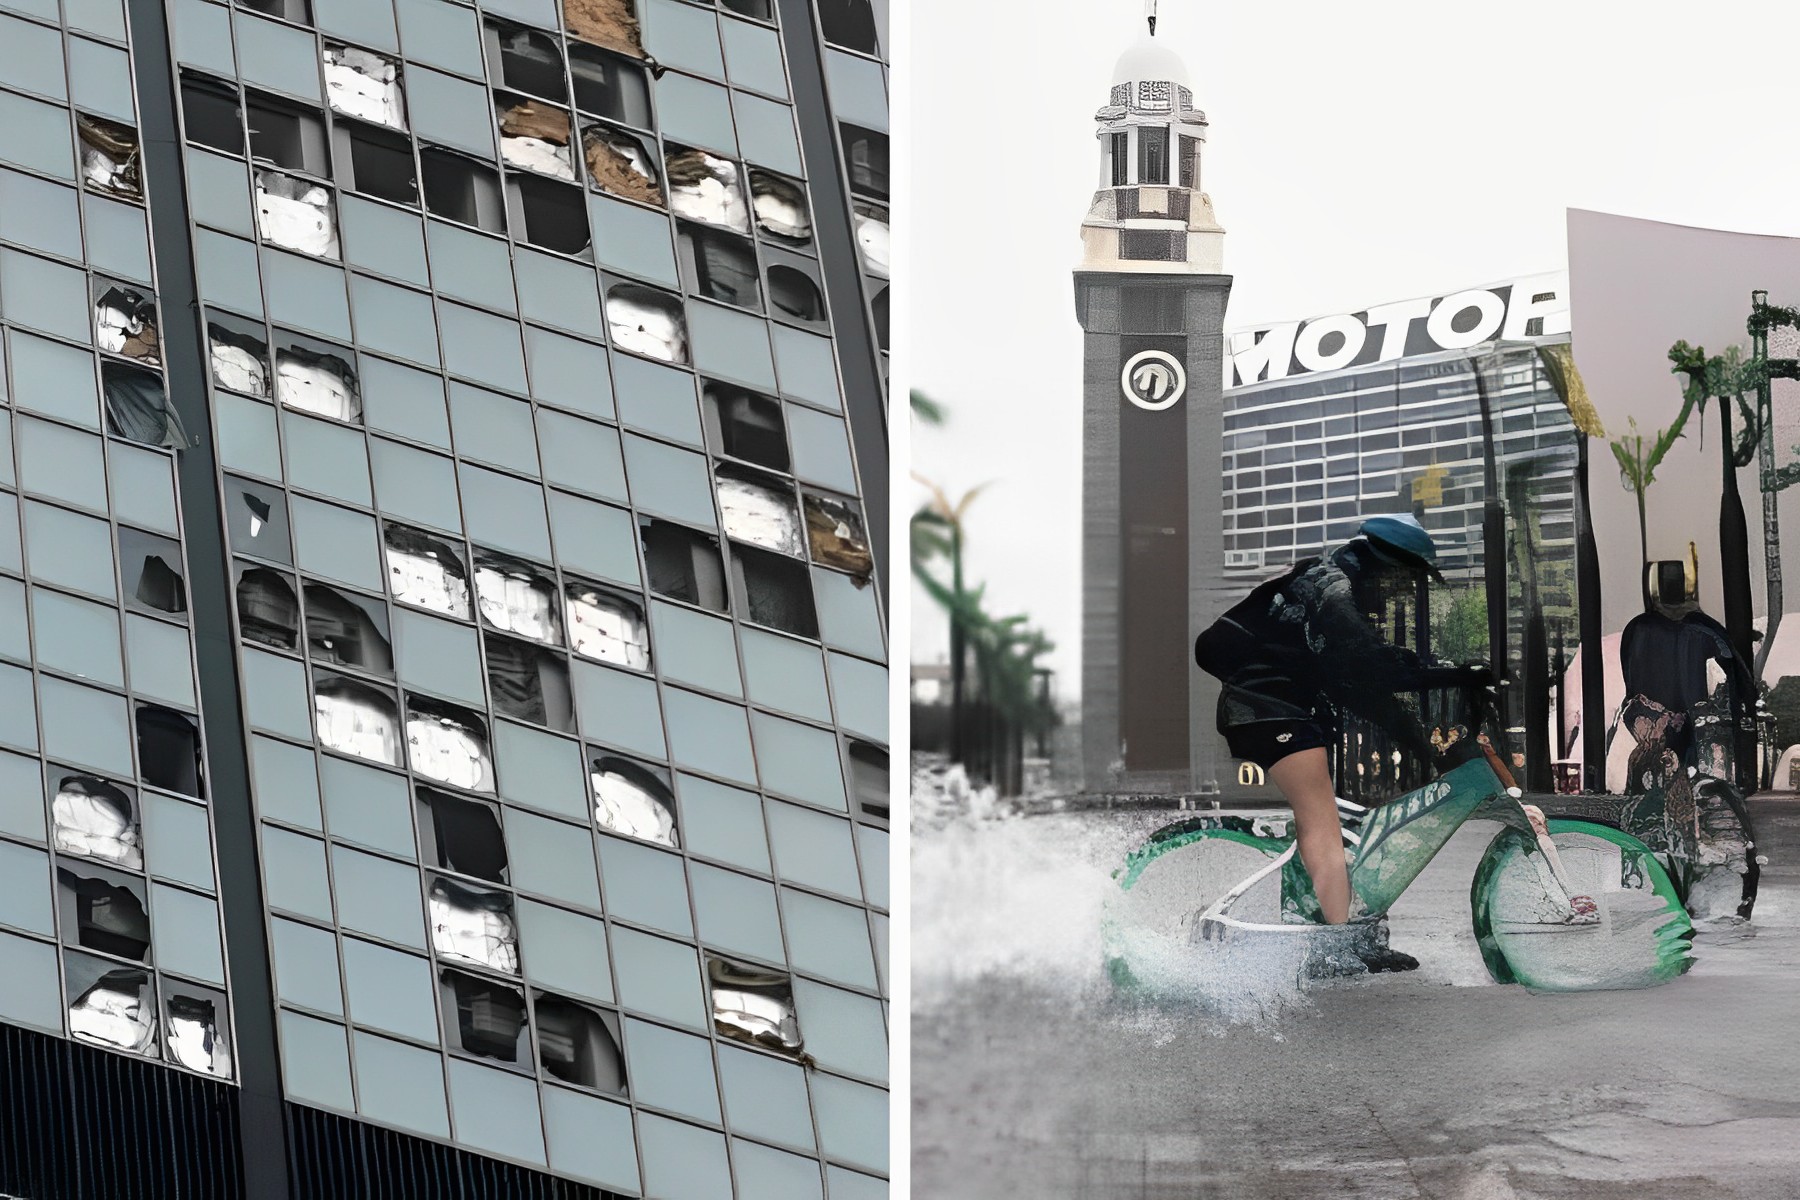 A collage showing two images related to Typhoon York. The first shows shattered windows of the Inland Revenue Office. The second shows two men cycling through the rain in Tsim Sha Tsui.